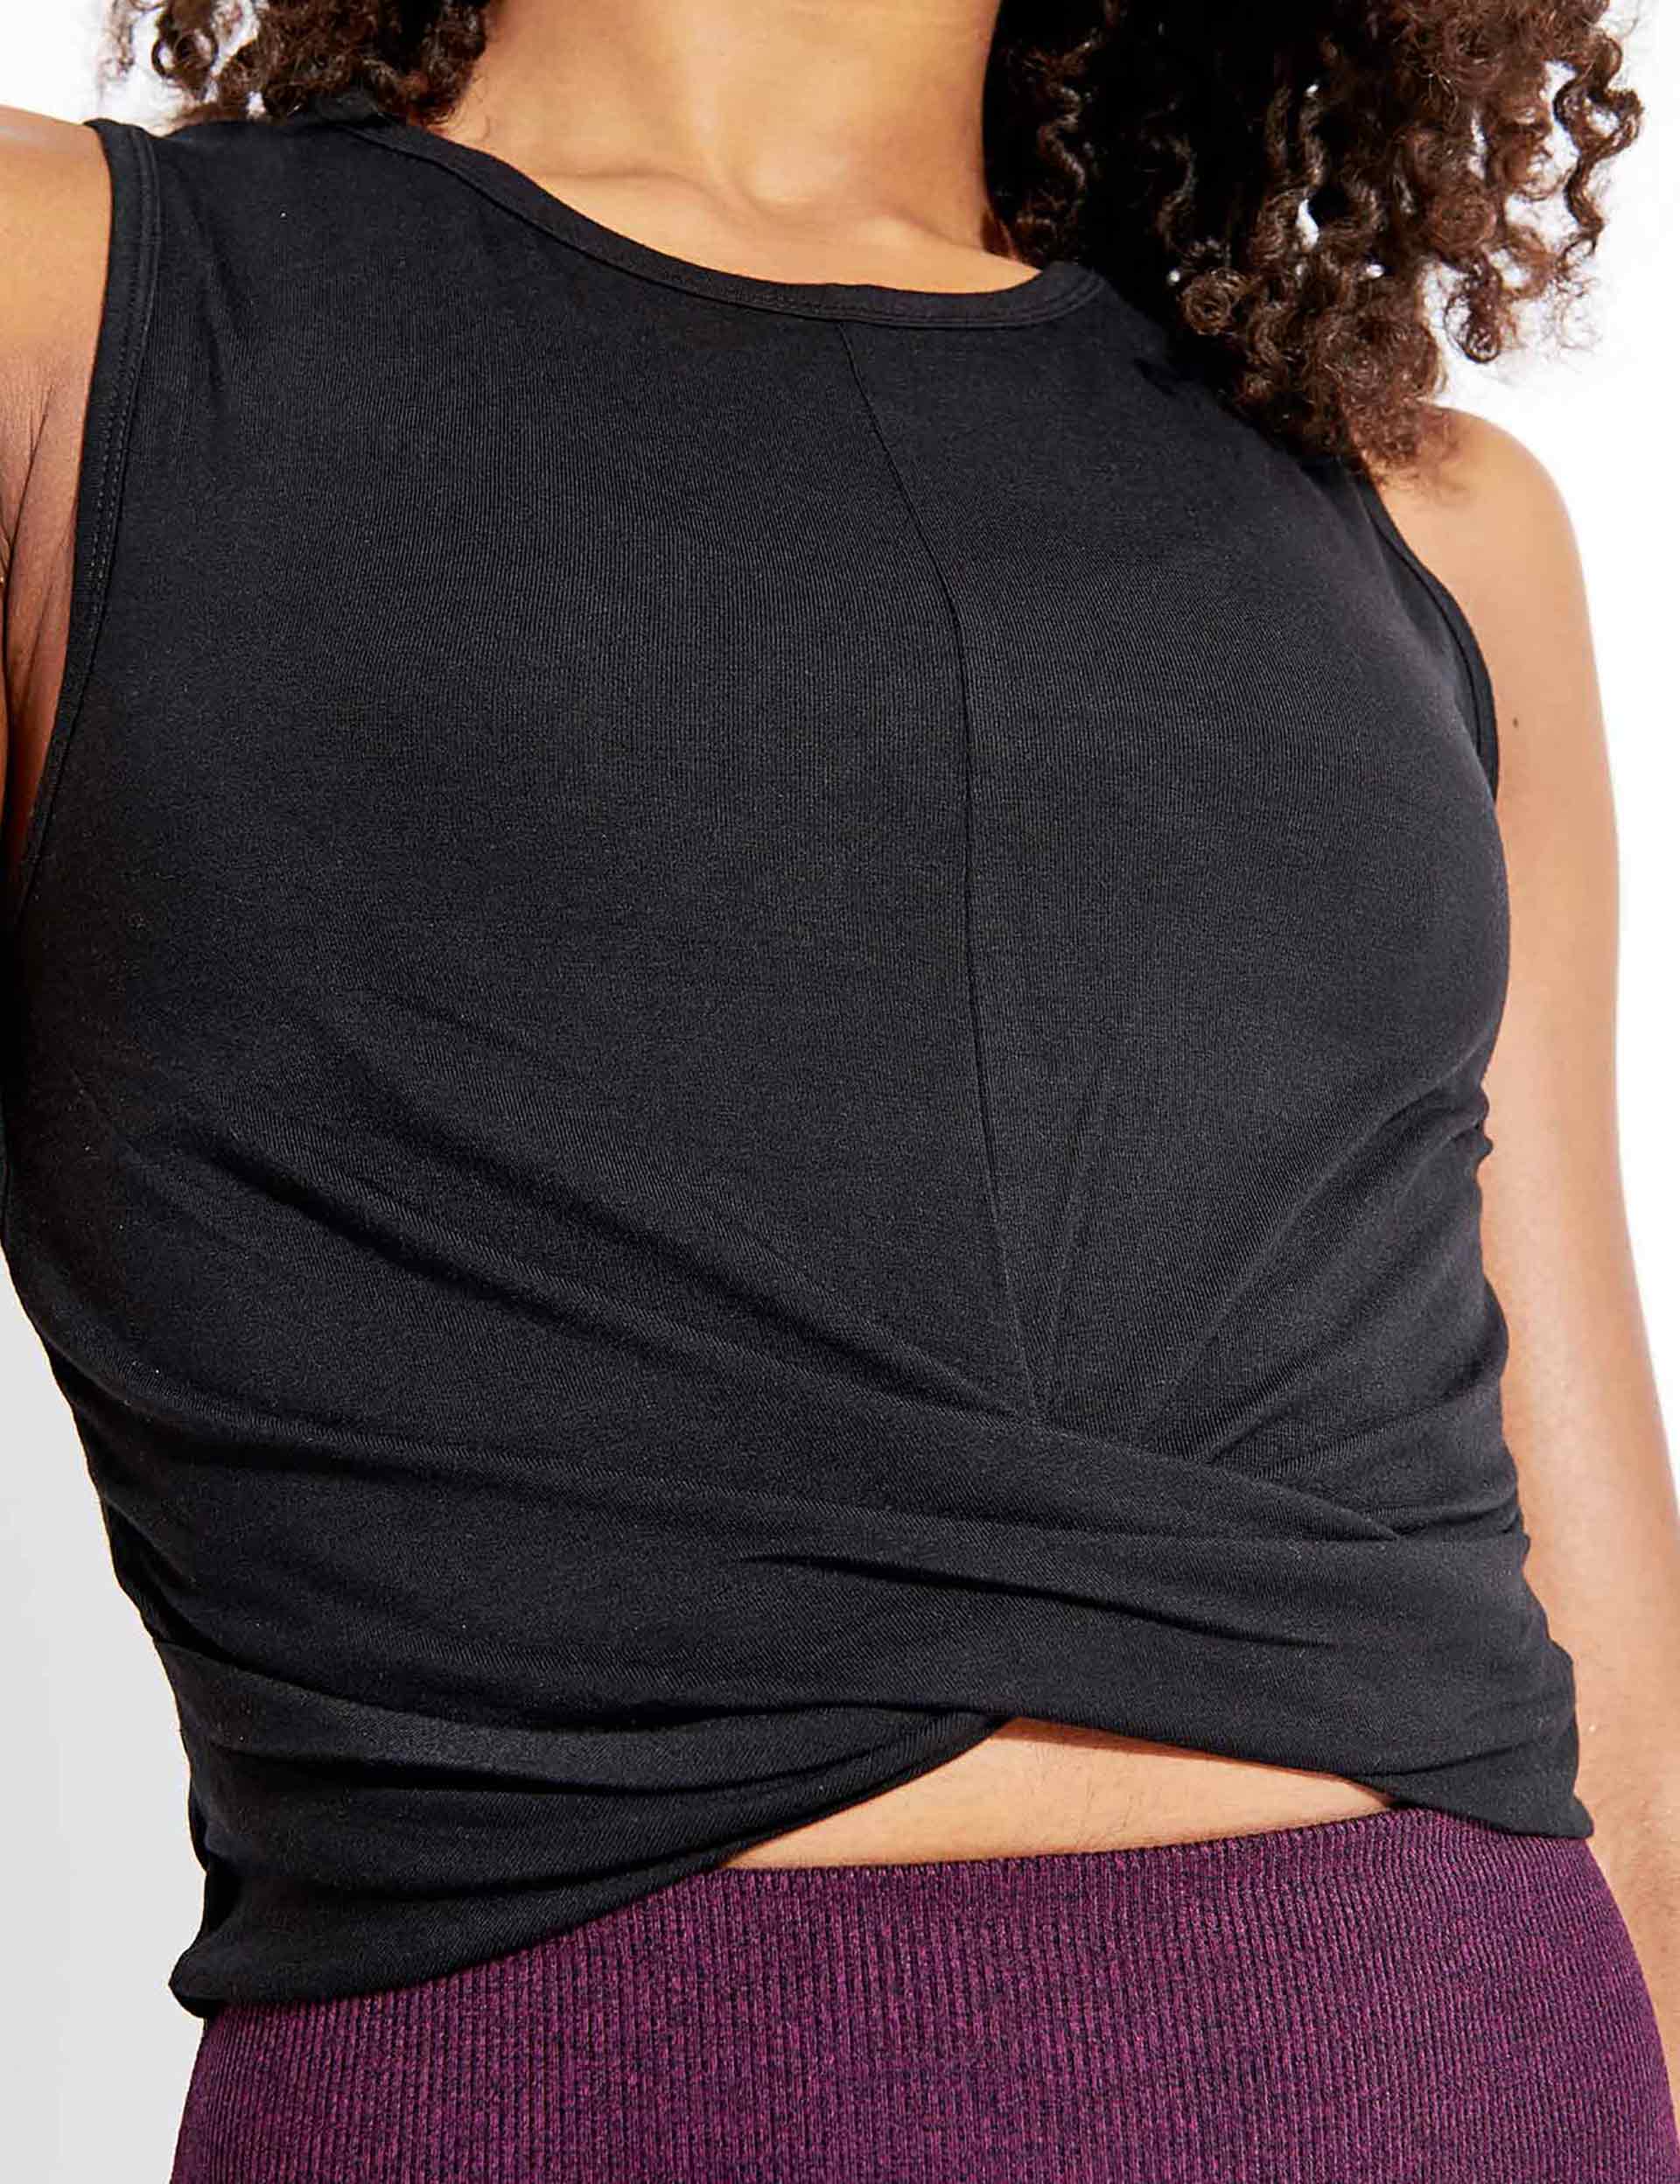 Cover Tank In Black by Alo Yoga at ORCHARD MILE